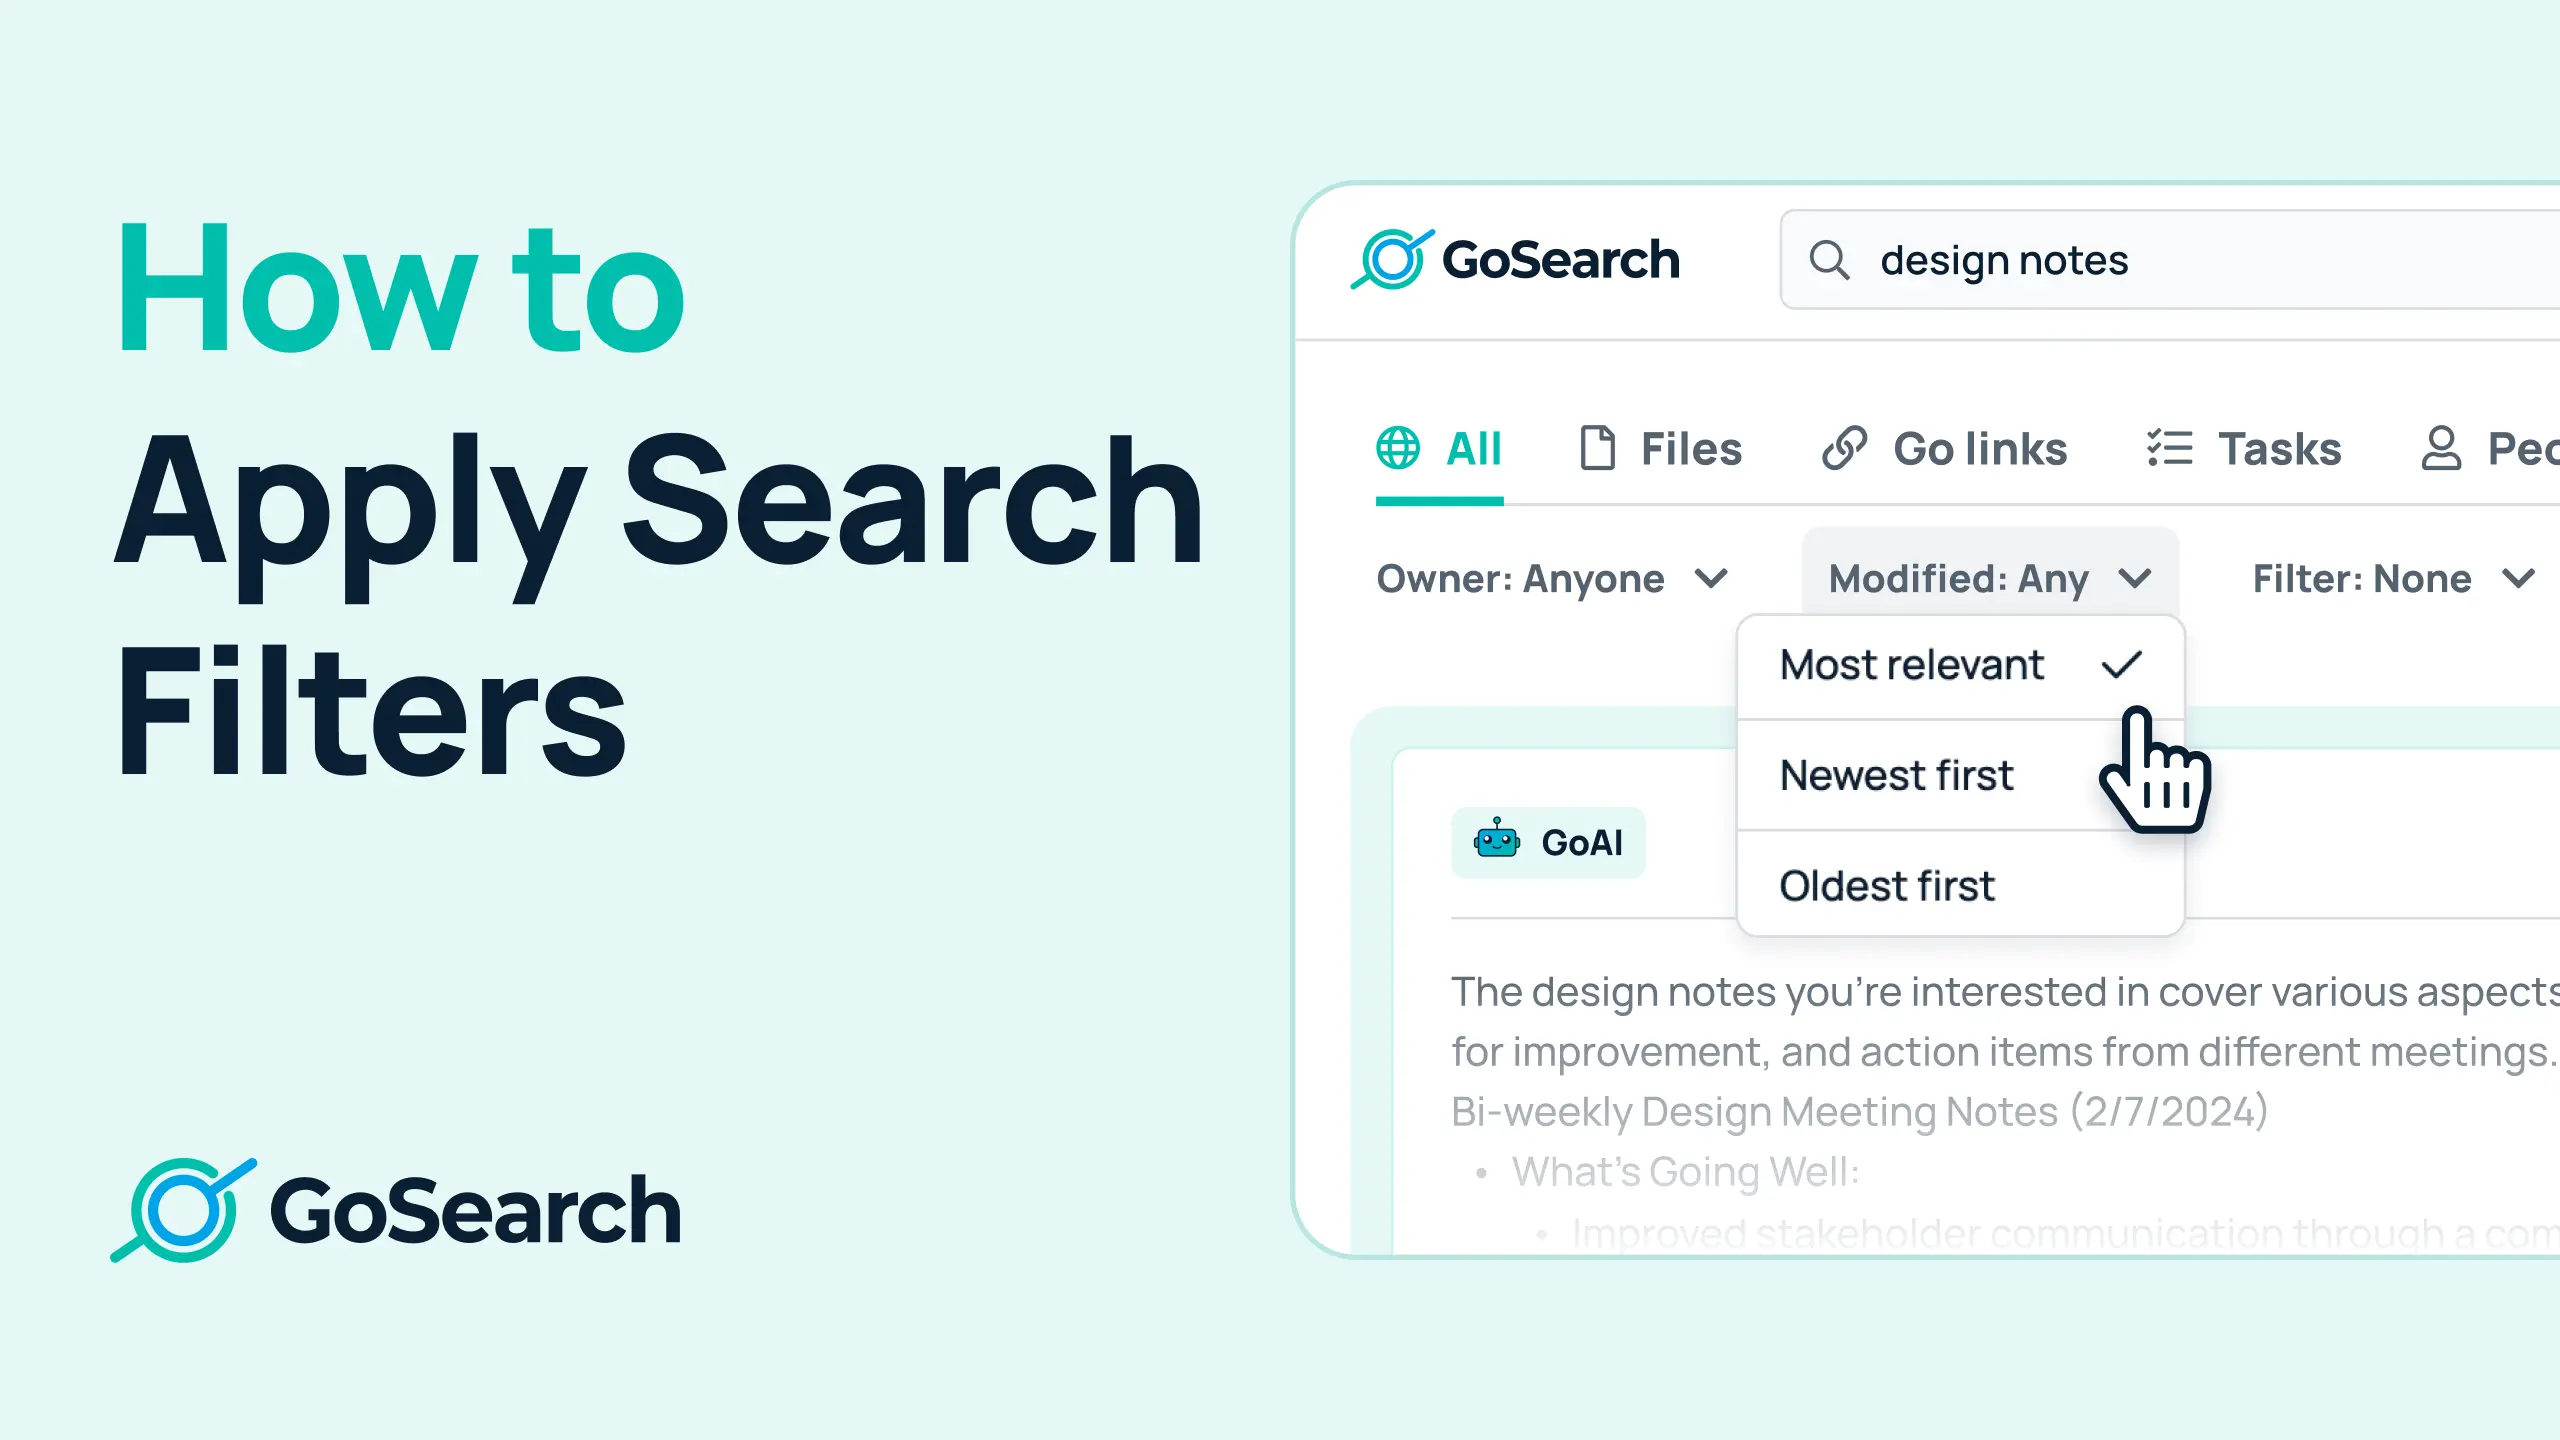 How to Apply Search Filters within GoSearch's AI Enterprise Search Engine